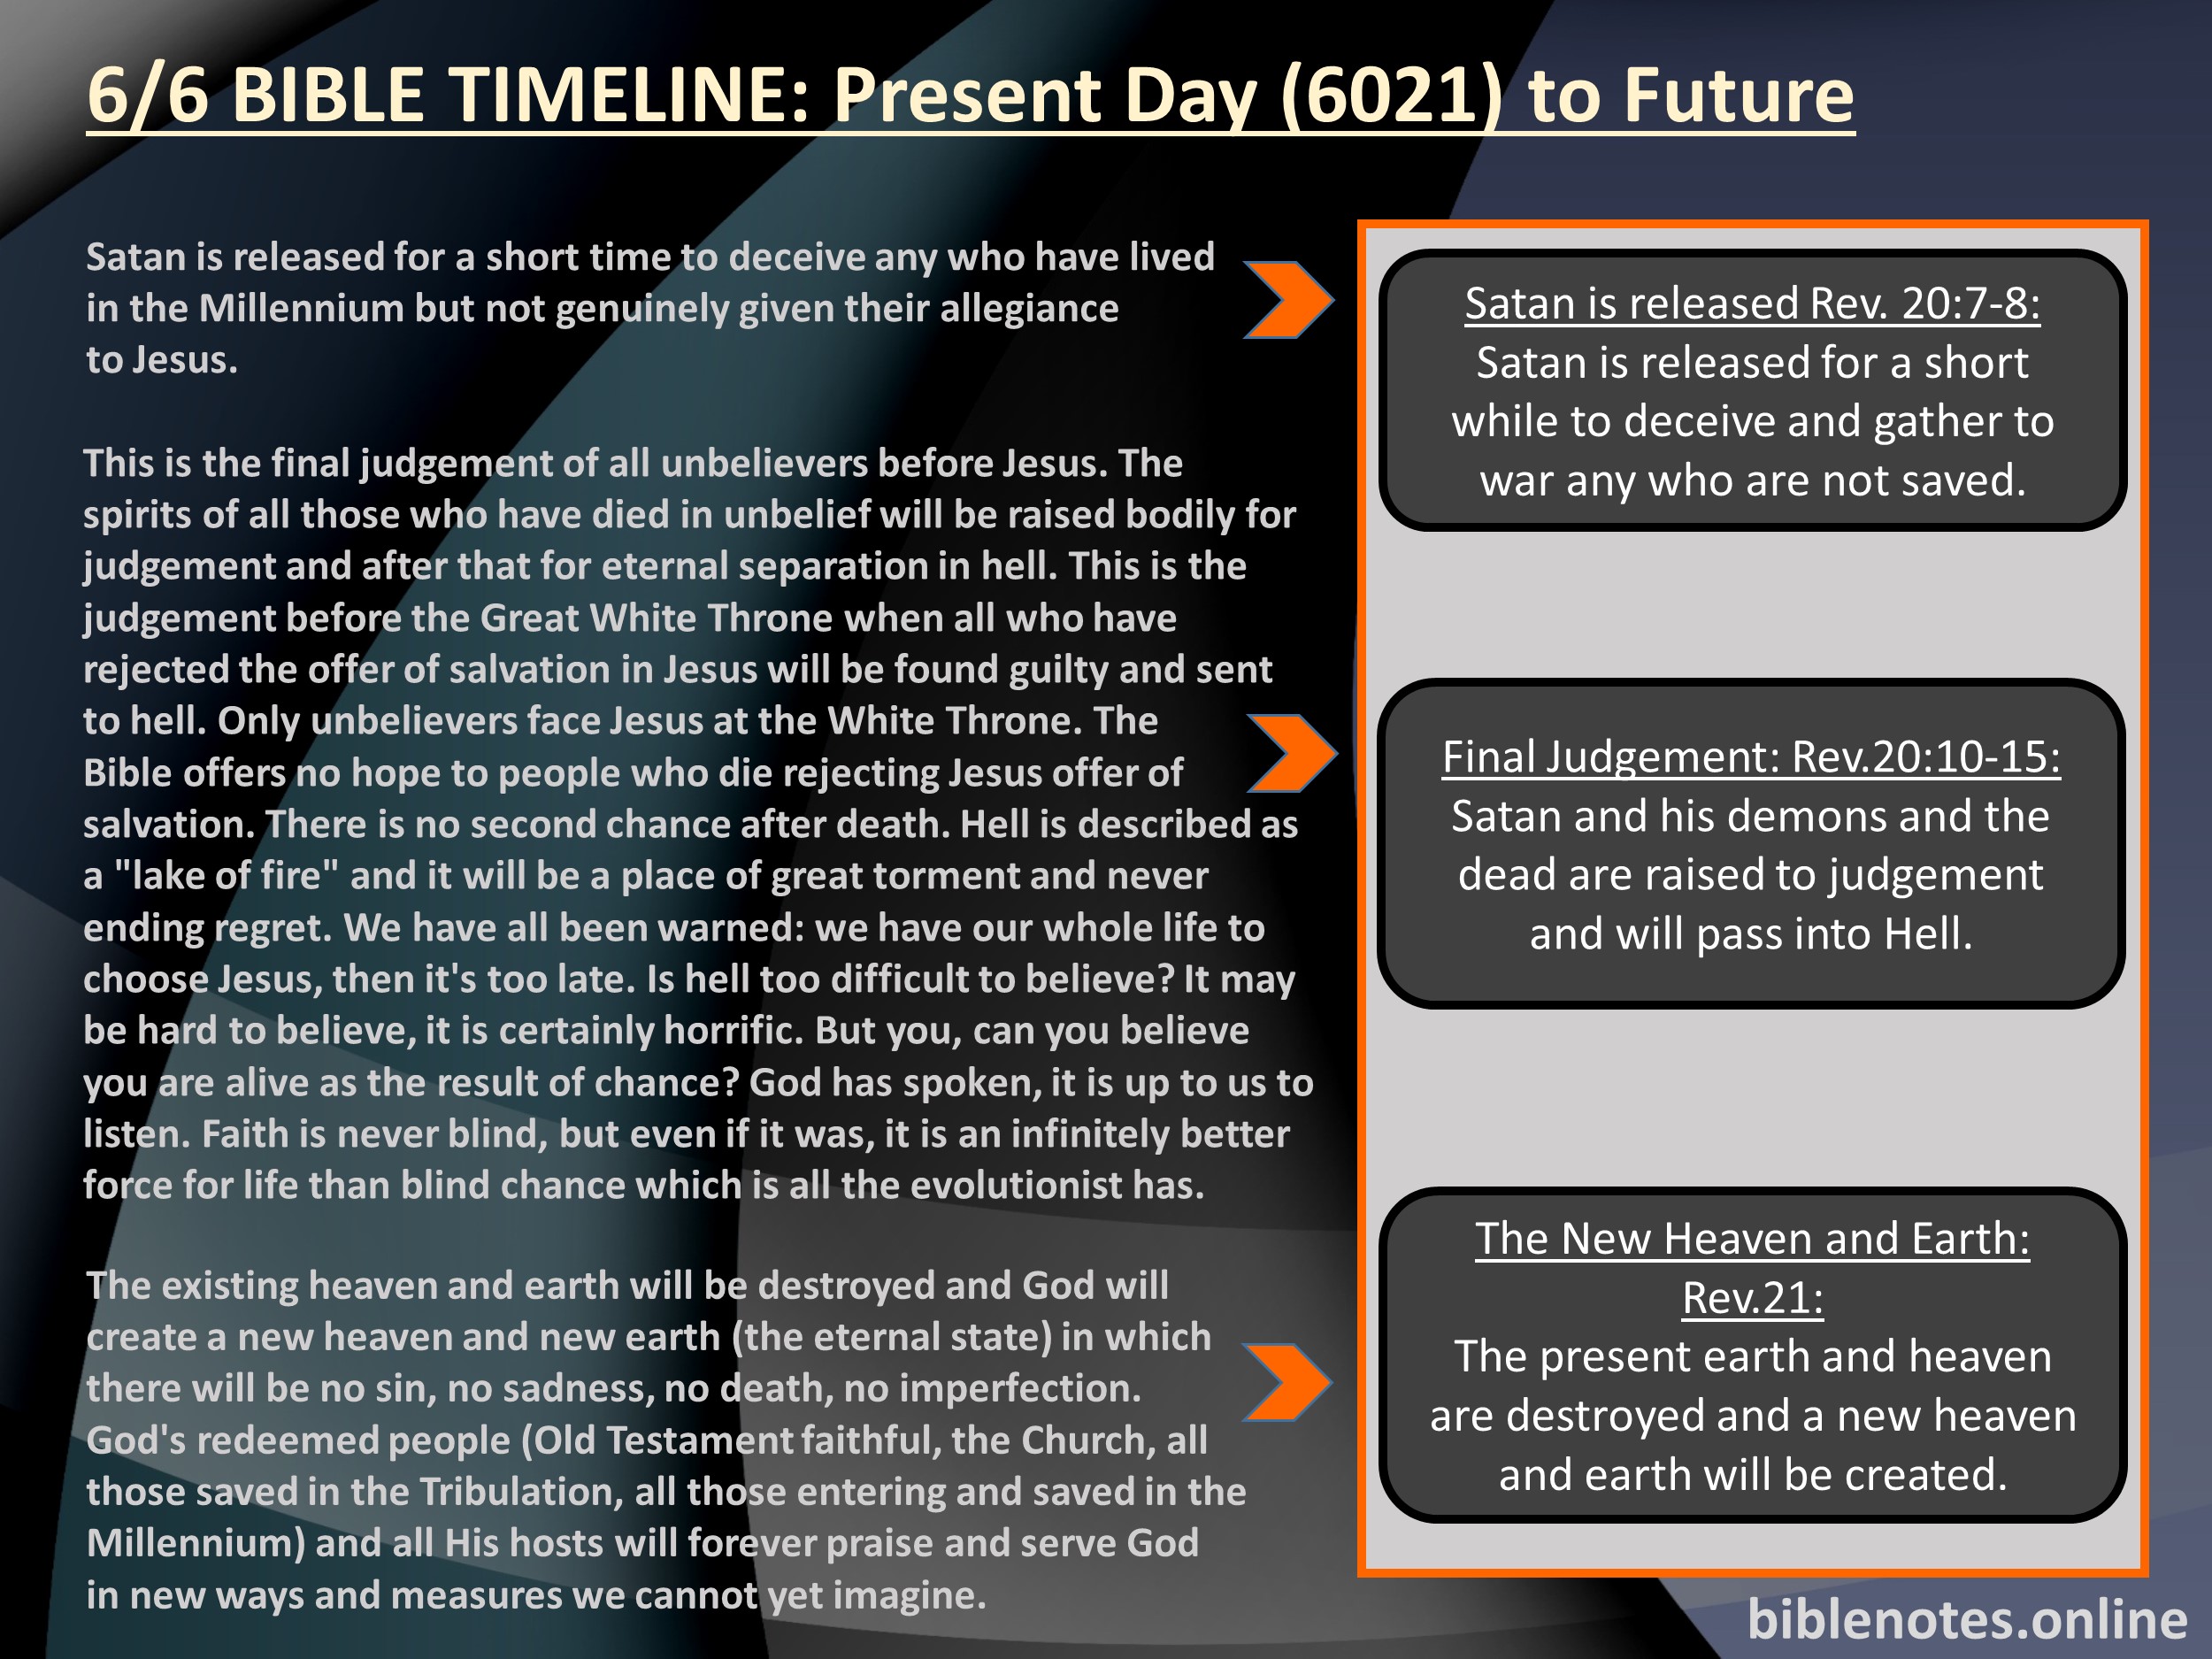 Bible Timeline: Satan's Release, Judgment. New Heaven and Earth